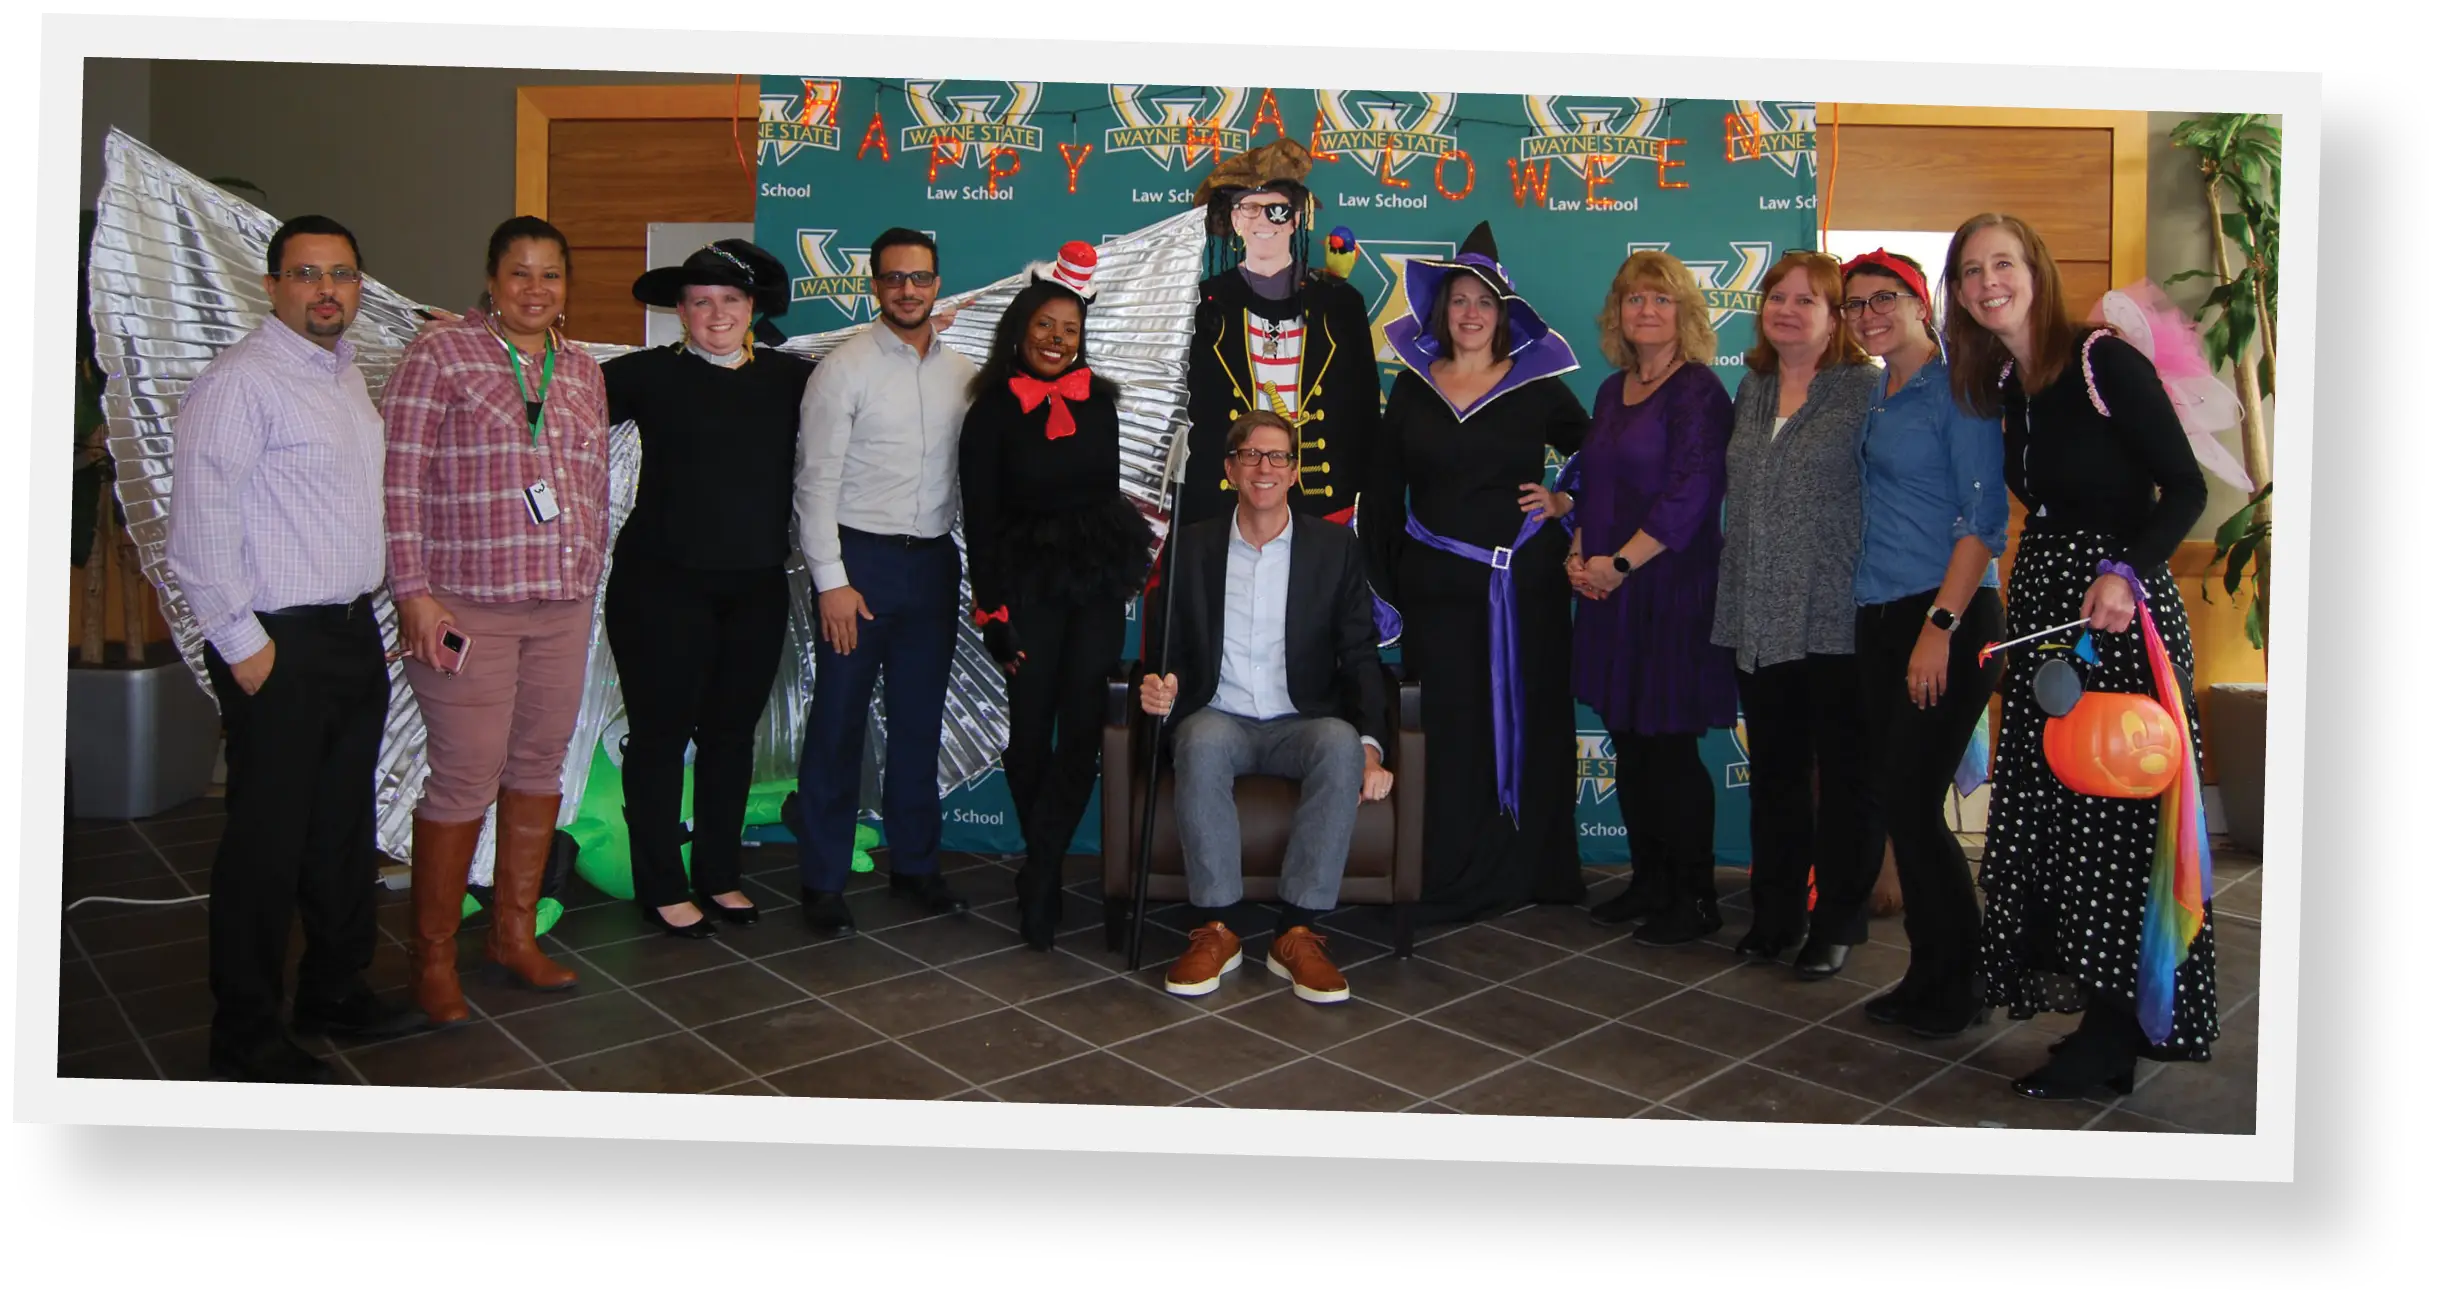 Group of faculty posing for picture during halloween party